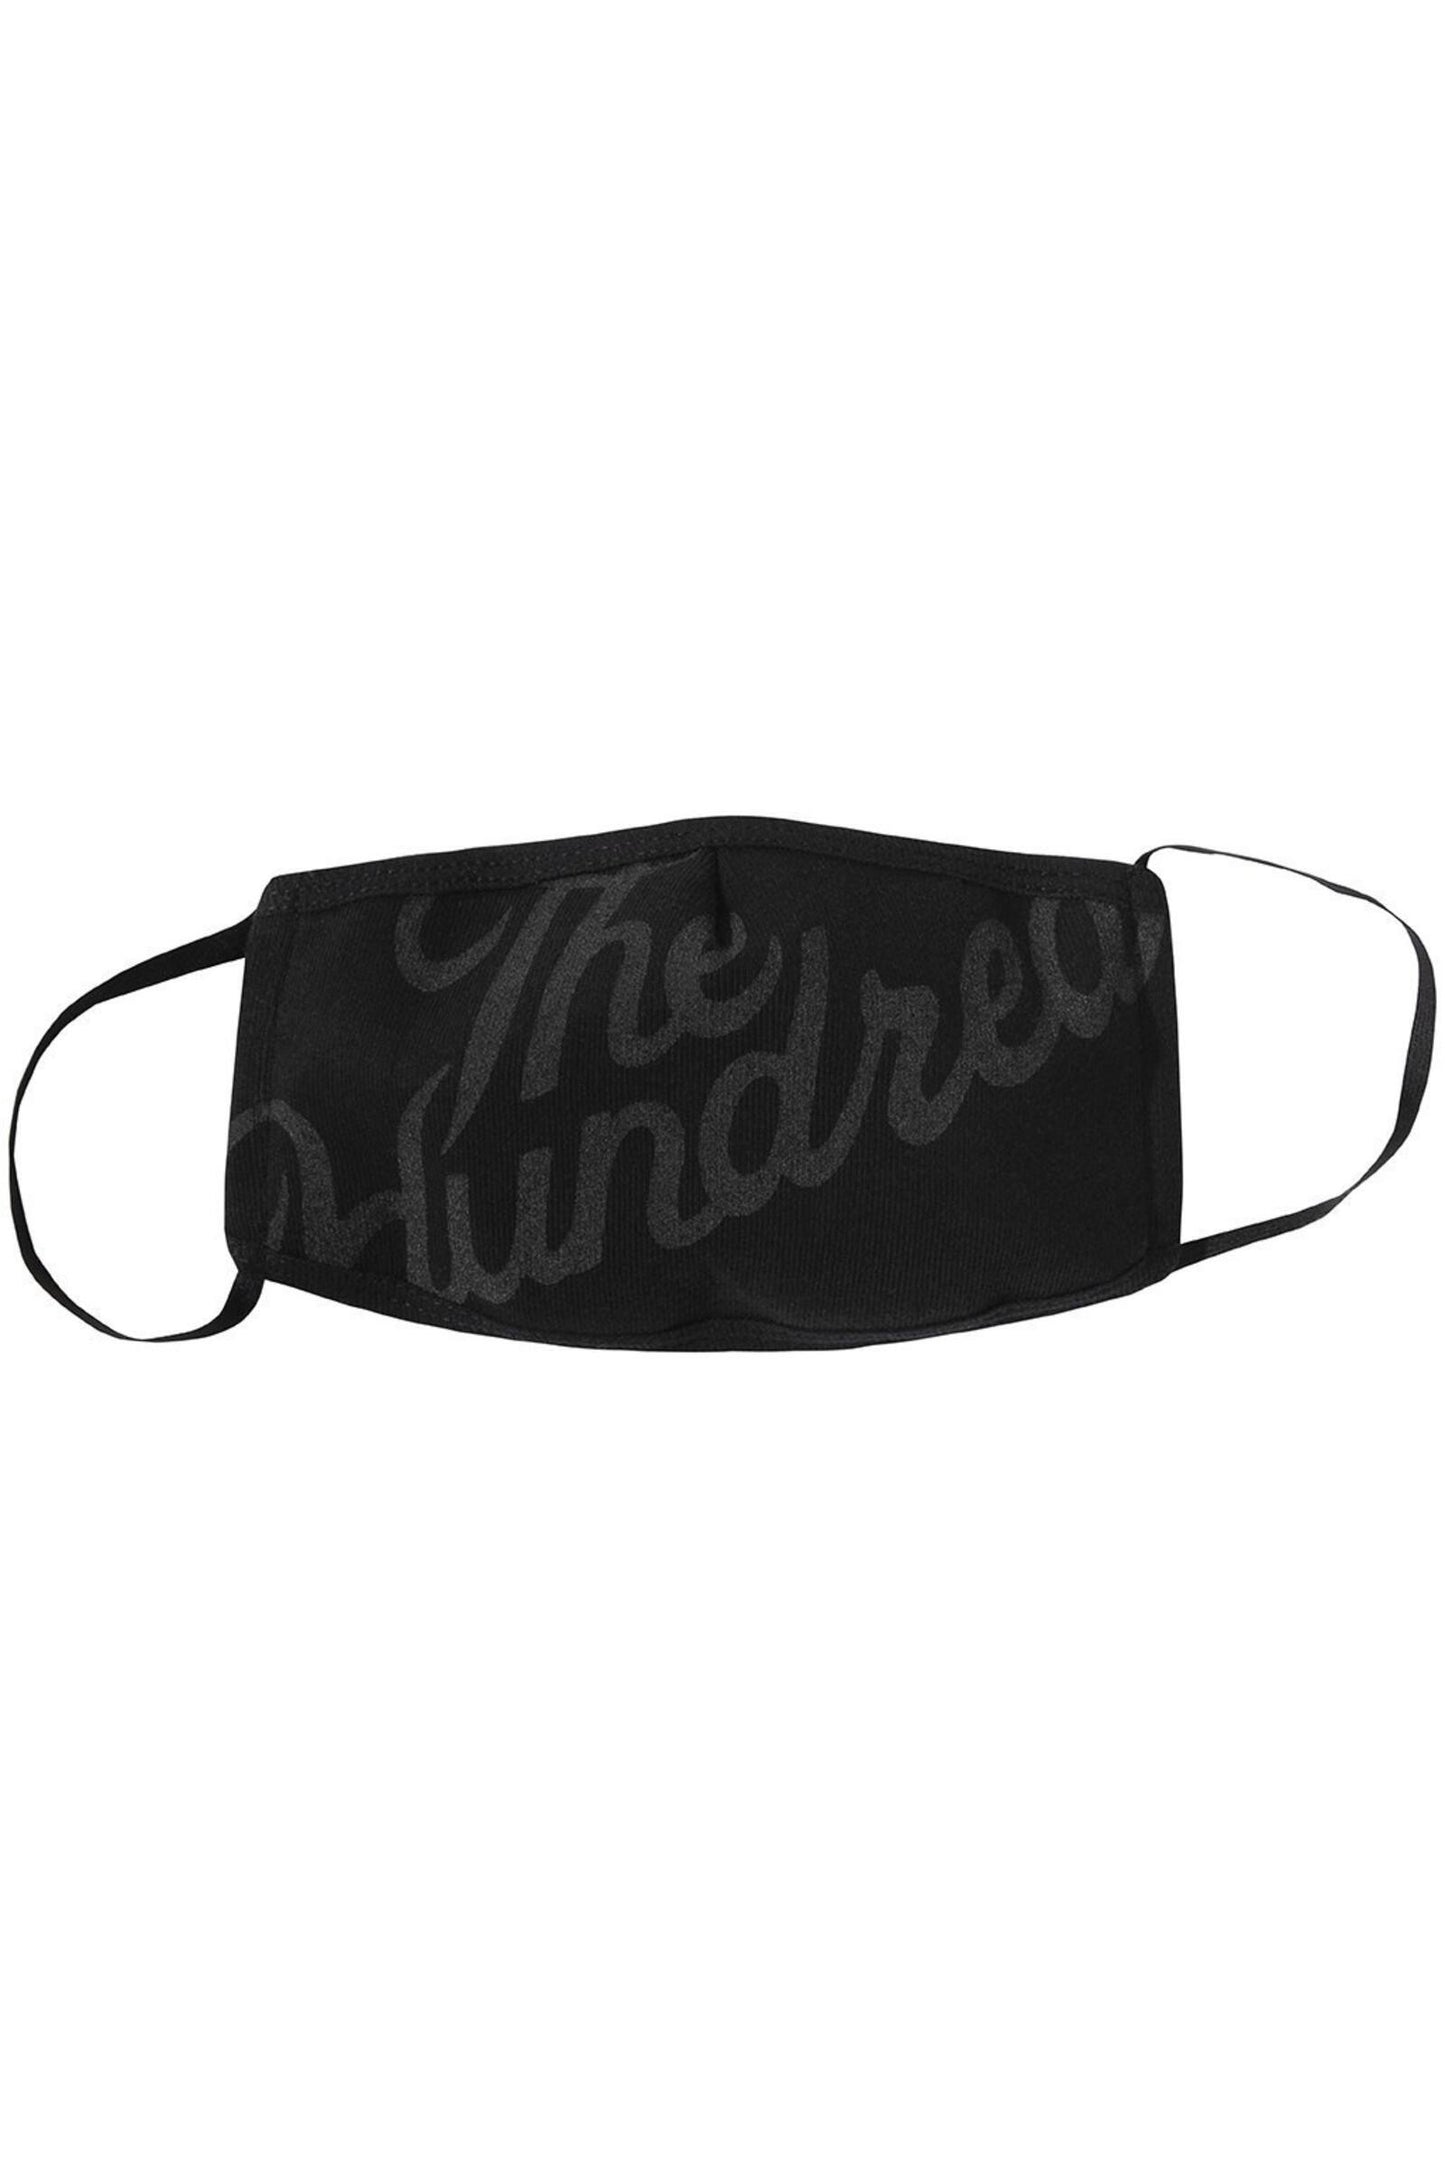 The Hundreds Wildfire Face Mask